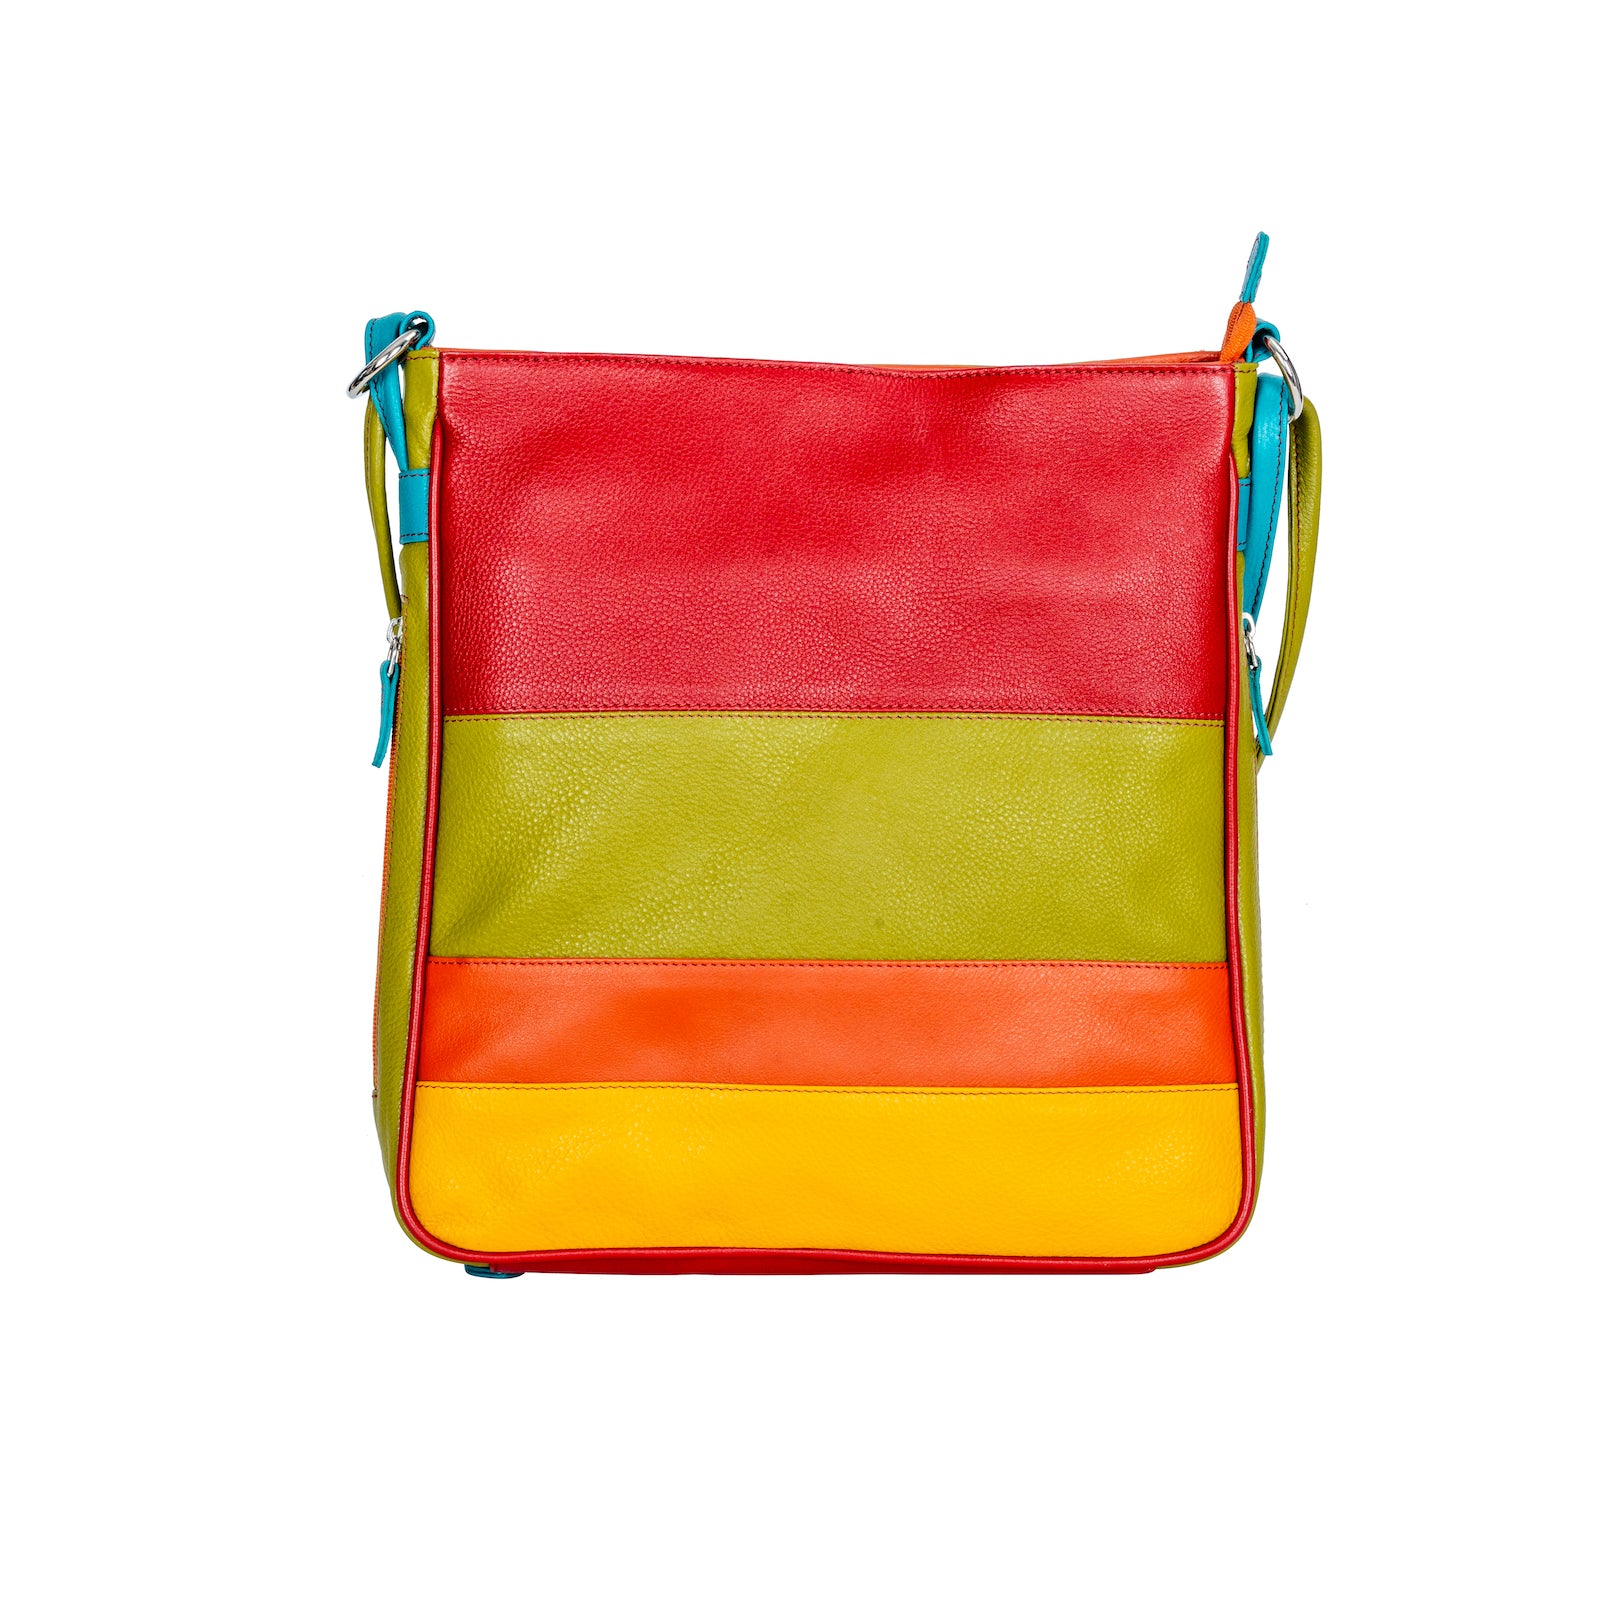 Leather Multicolor Backpack Mae - RED - Leather Greenwood Bag | The Greenwood Leather Online Shop Australia